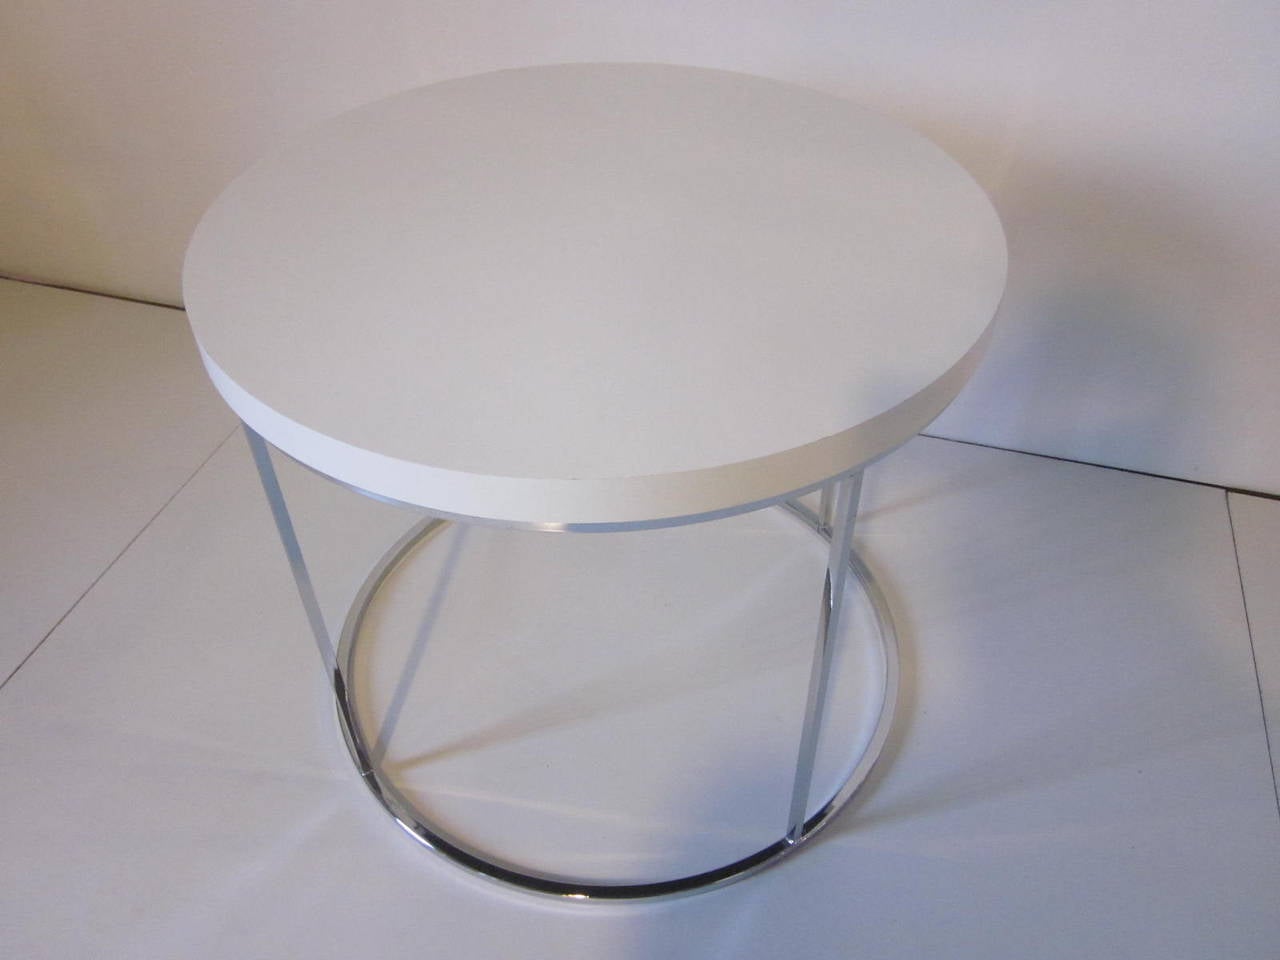 A chromed square tubed side table with a white laminate top manufactured by Thayer Coggin.